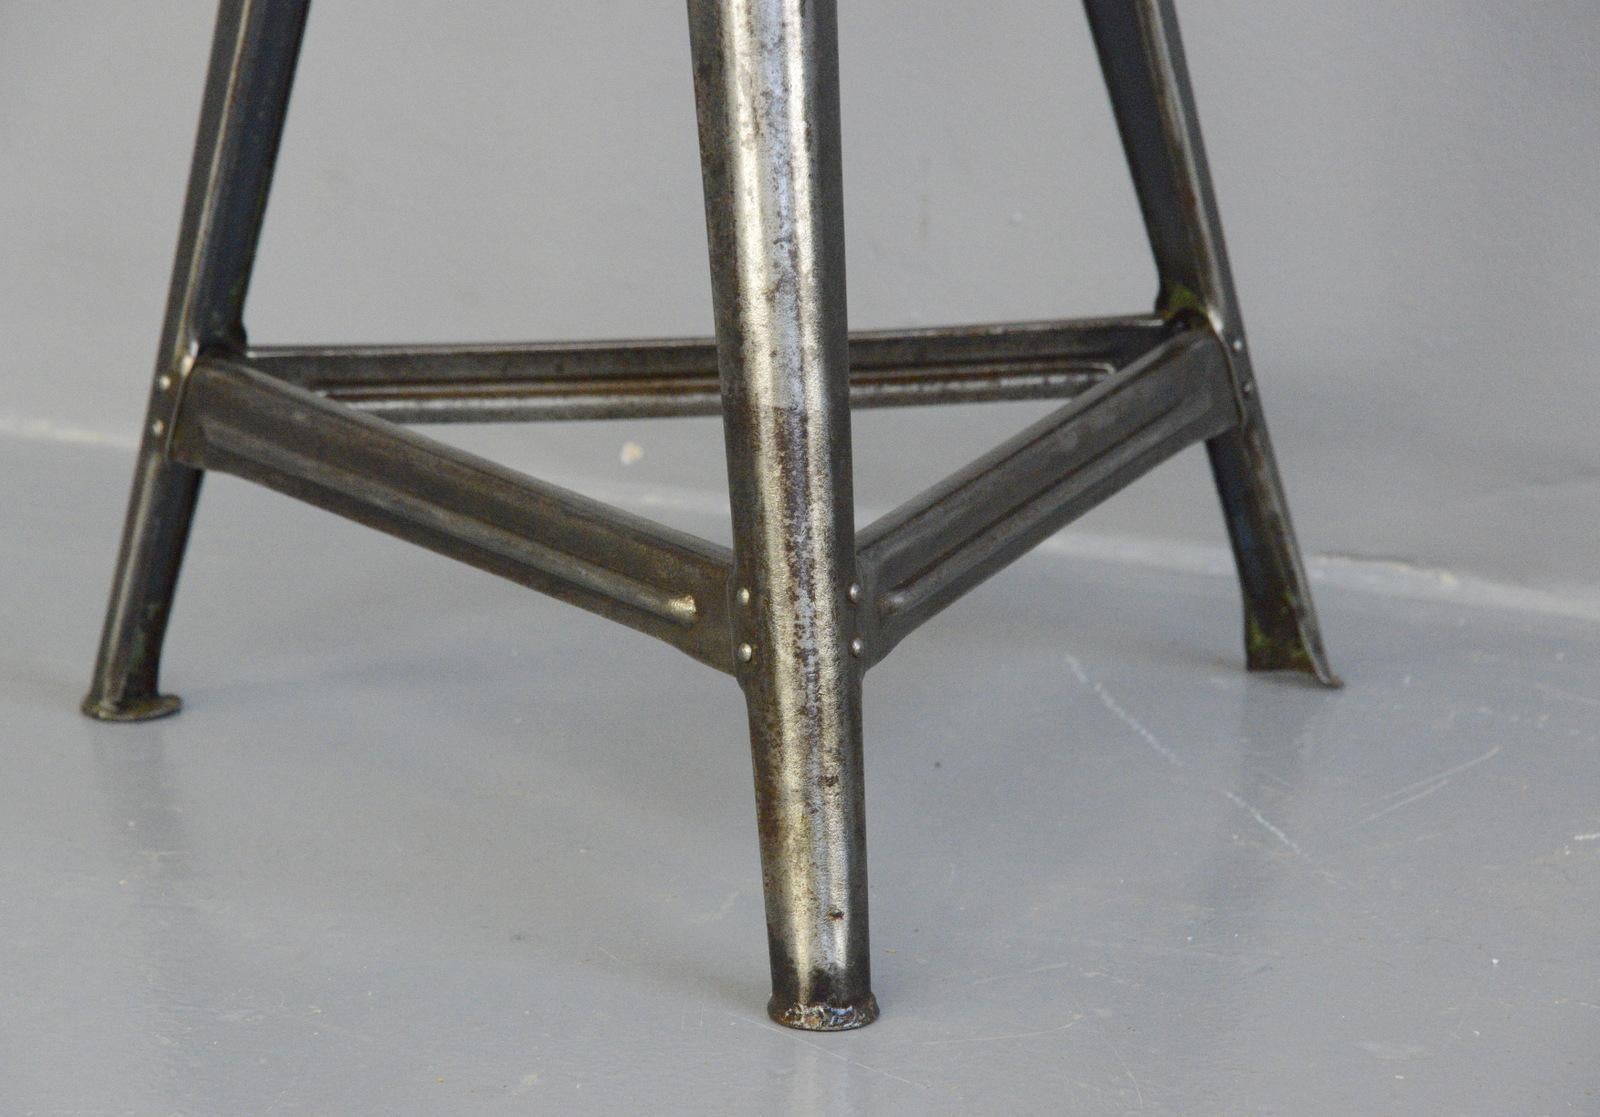 Industrial factory stool by Rowac, circa 1930s

- Branded under the seat
- By Robert Wagner, Chemnitz
- German, 1930s
- Size: 60cm tall x 35cm wide

Rowac

Robert Wagner’s founded his company in 1888 in Chemnitz, better known as Rowac. His